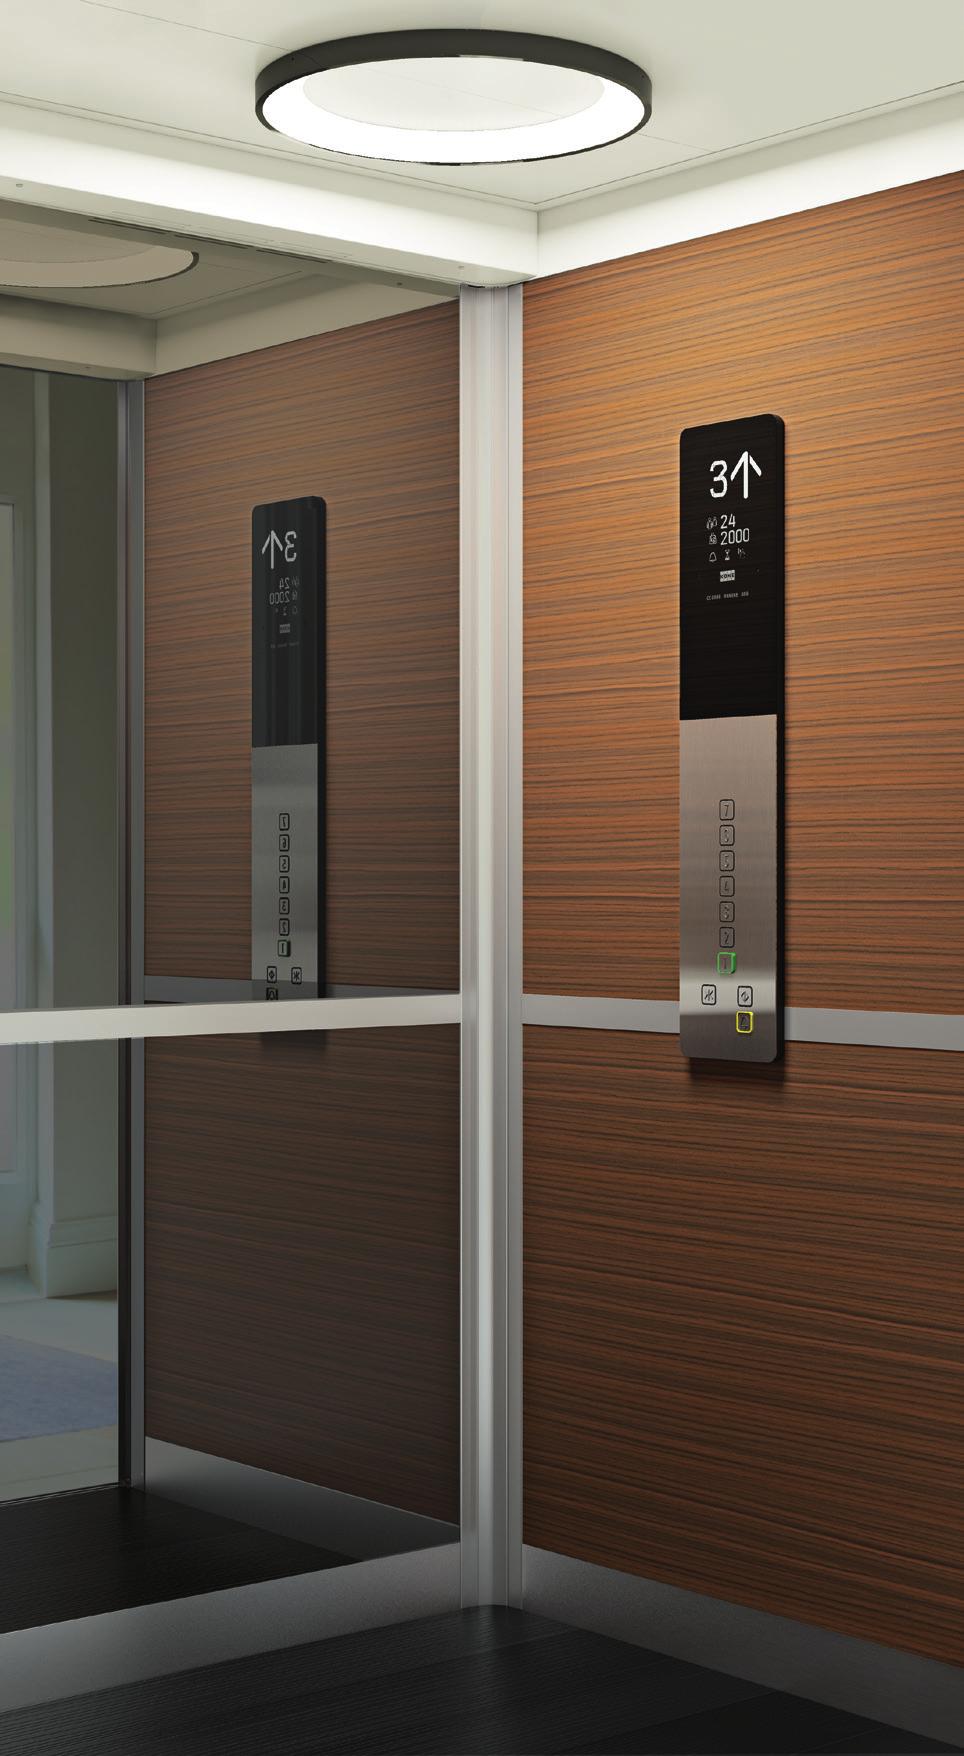 THE MOST SPACE-EFFICIENT LIFT SOLUTION ON THE MARKET A lift is a necessary part of modern urban living.